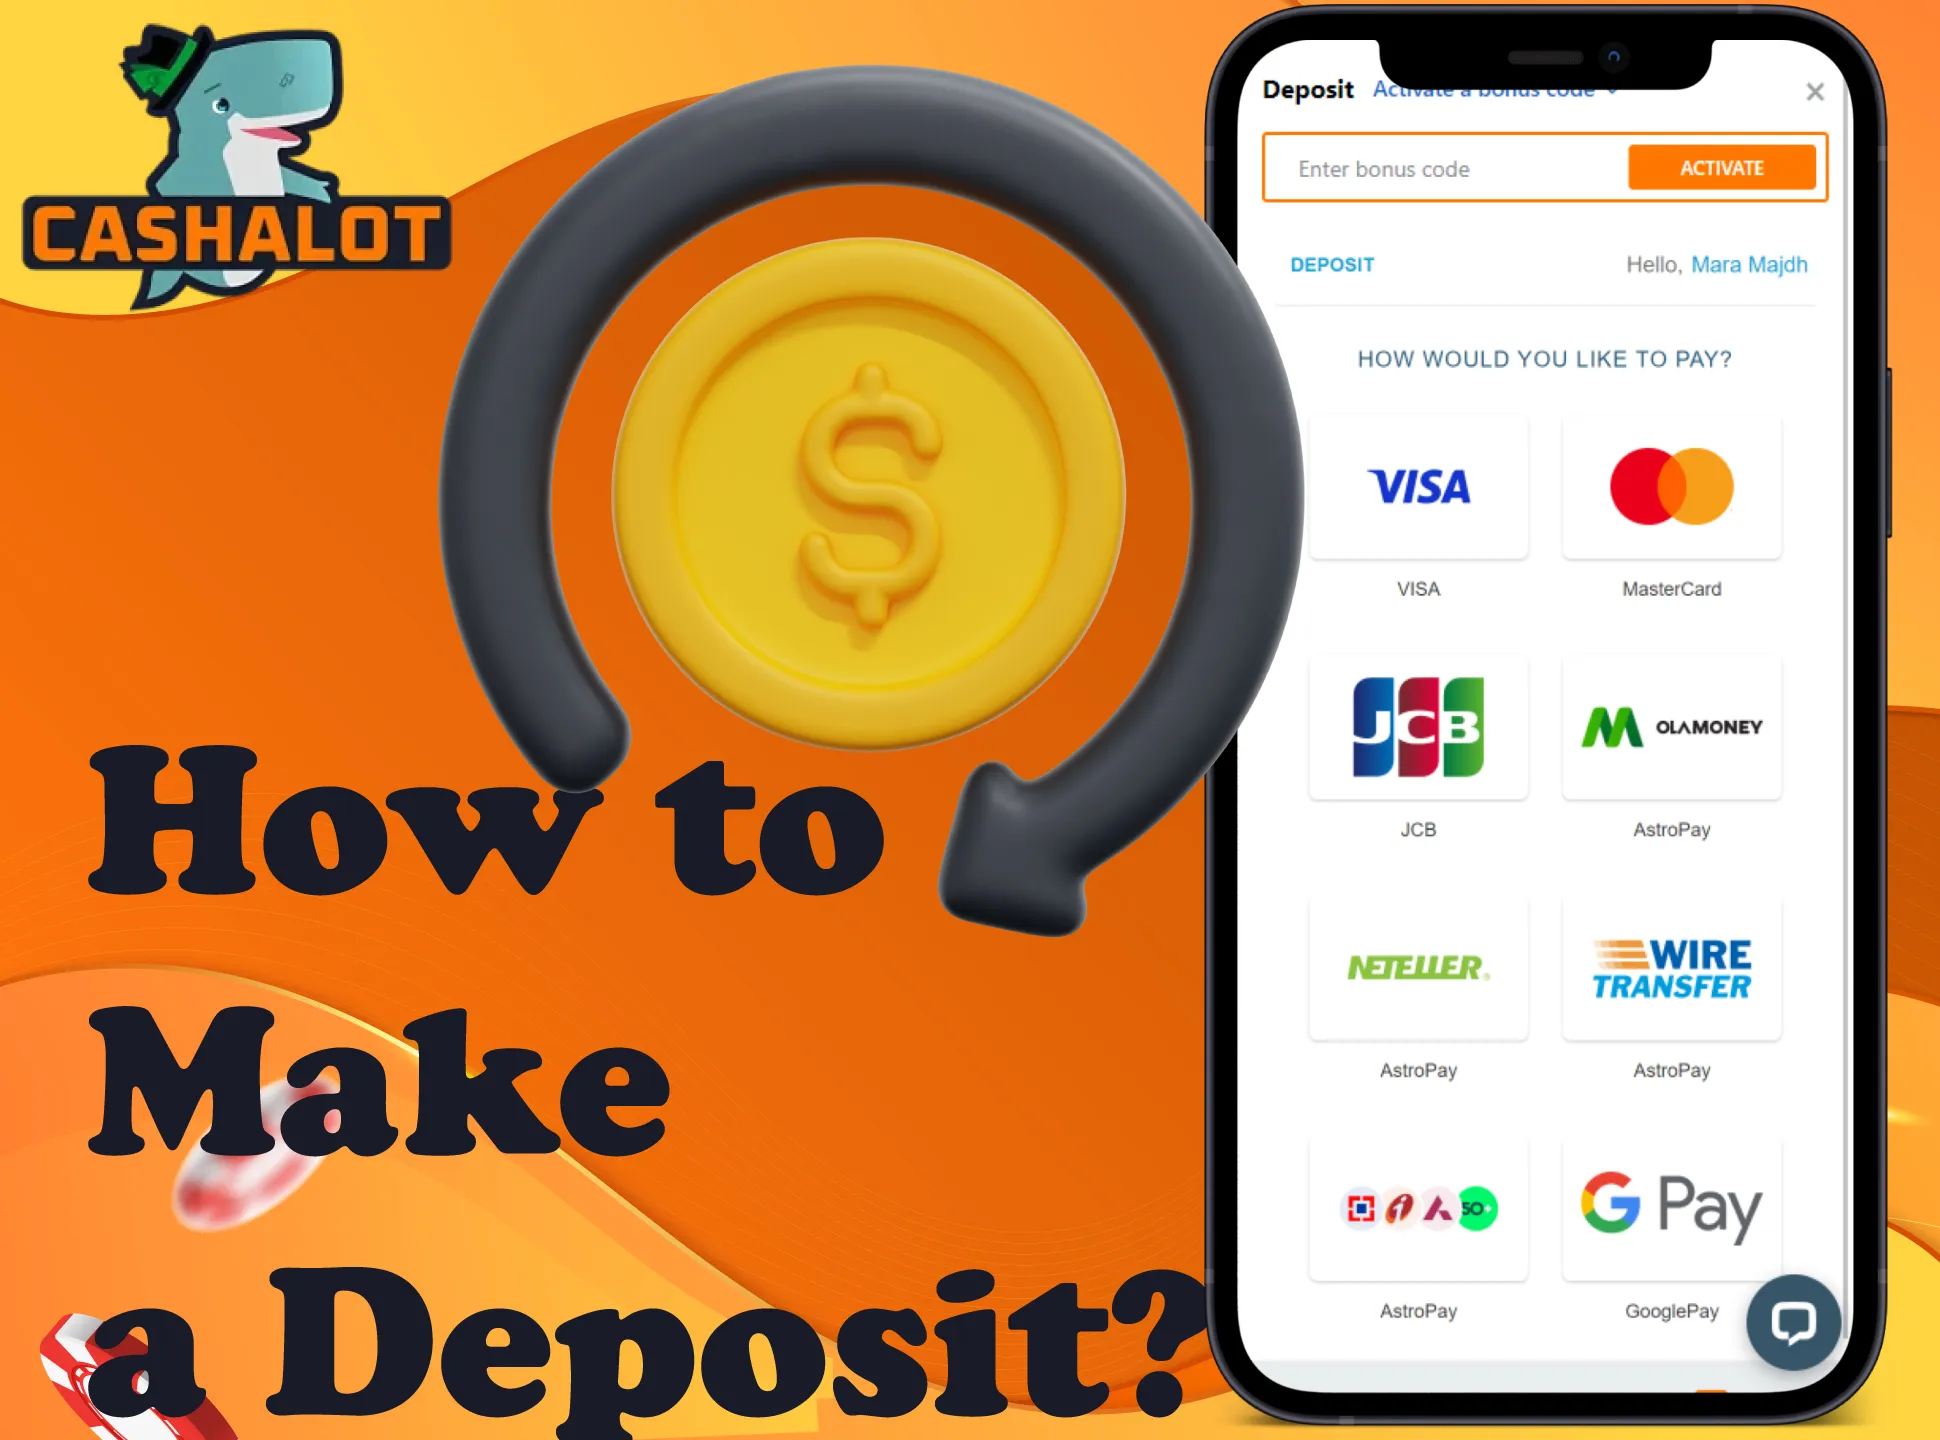 Make a deposit and get a bonus in the Cashalot app.